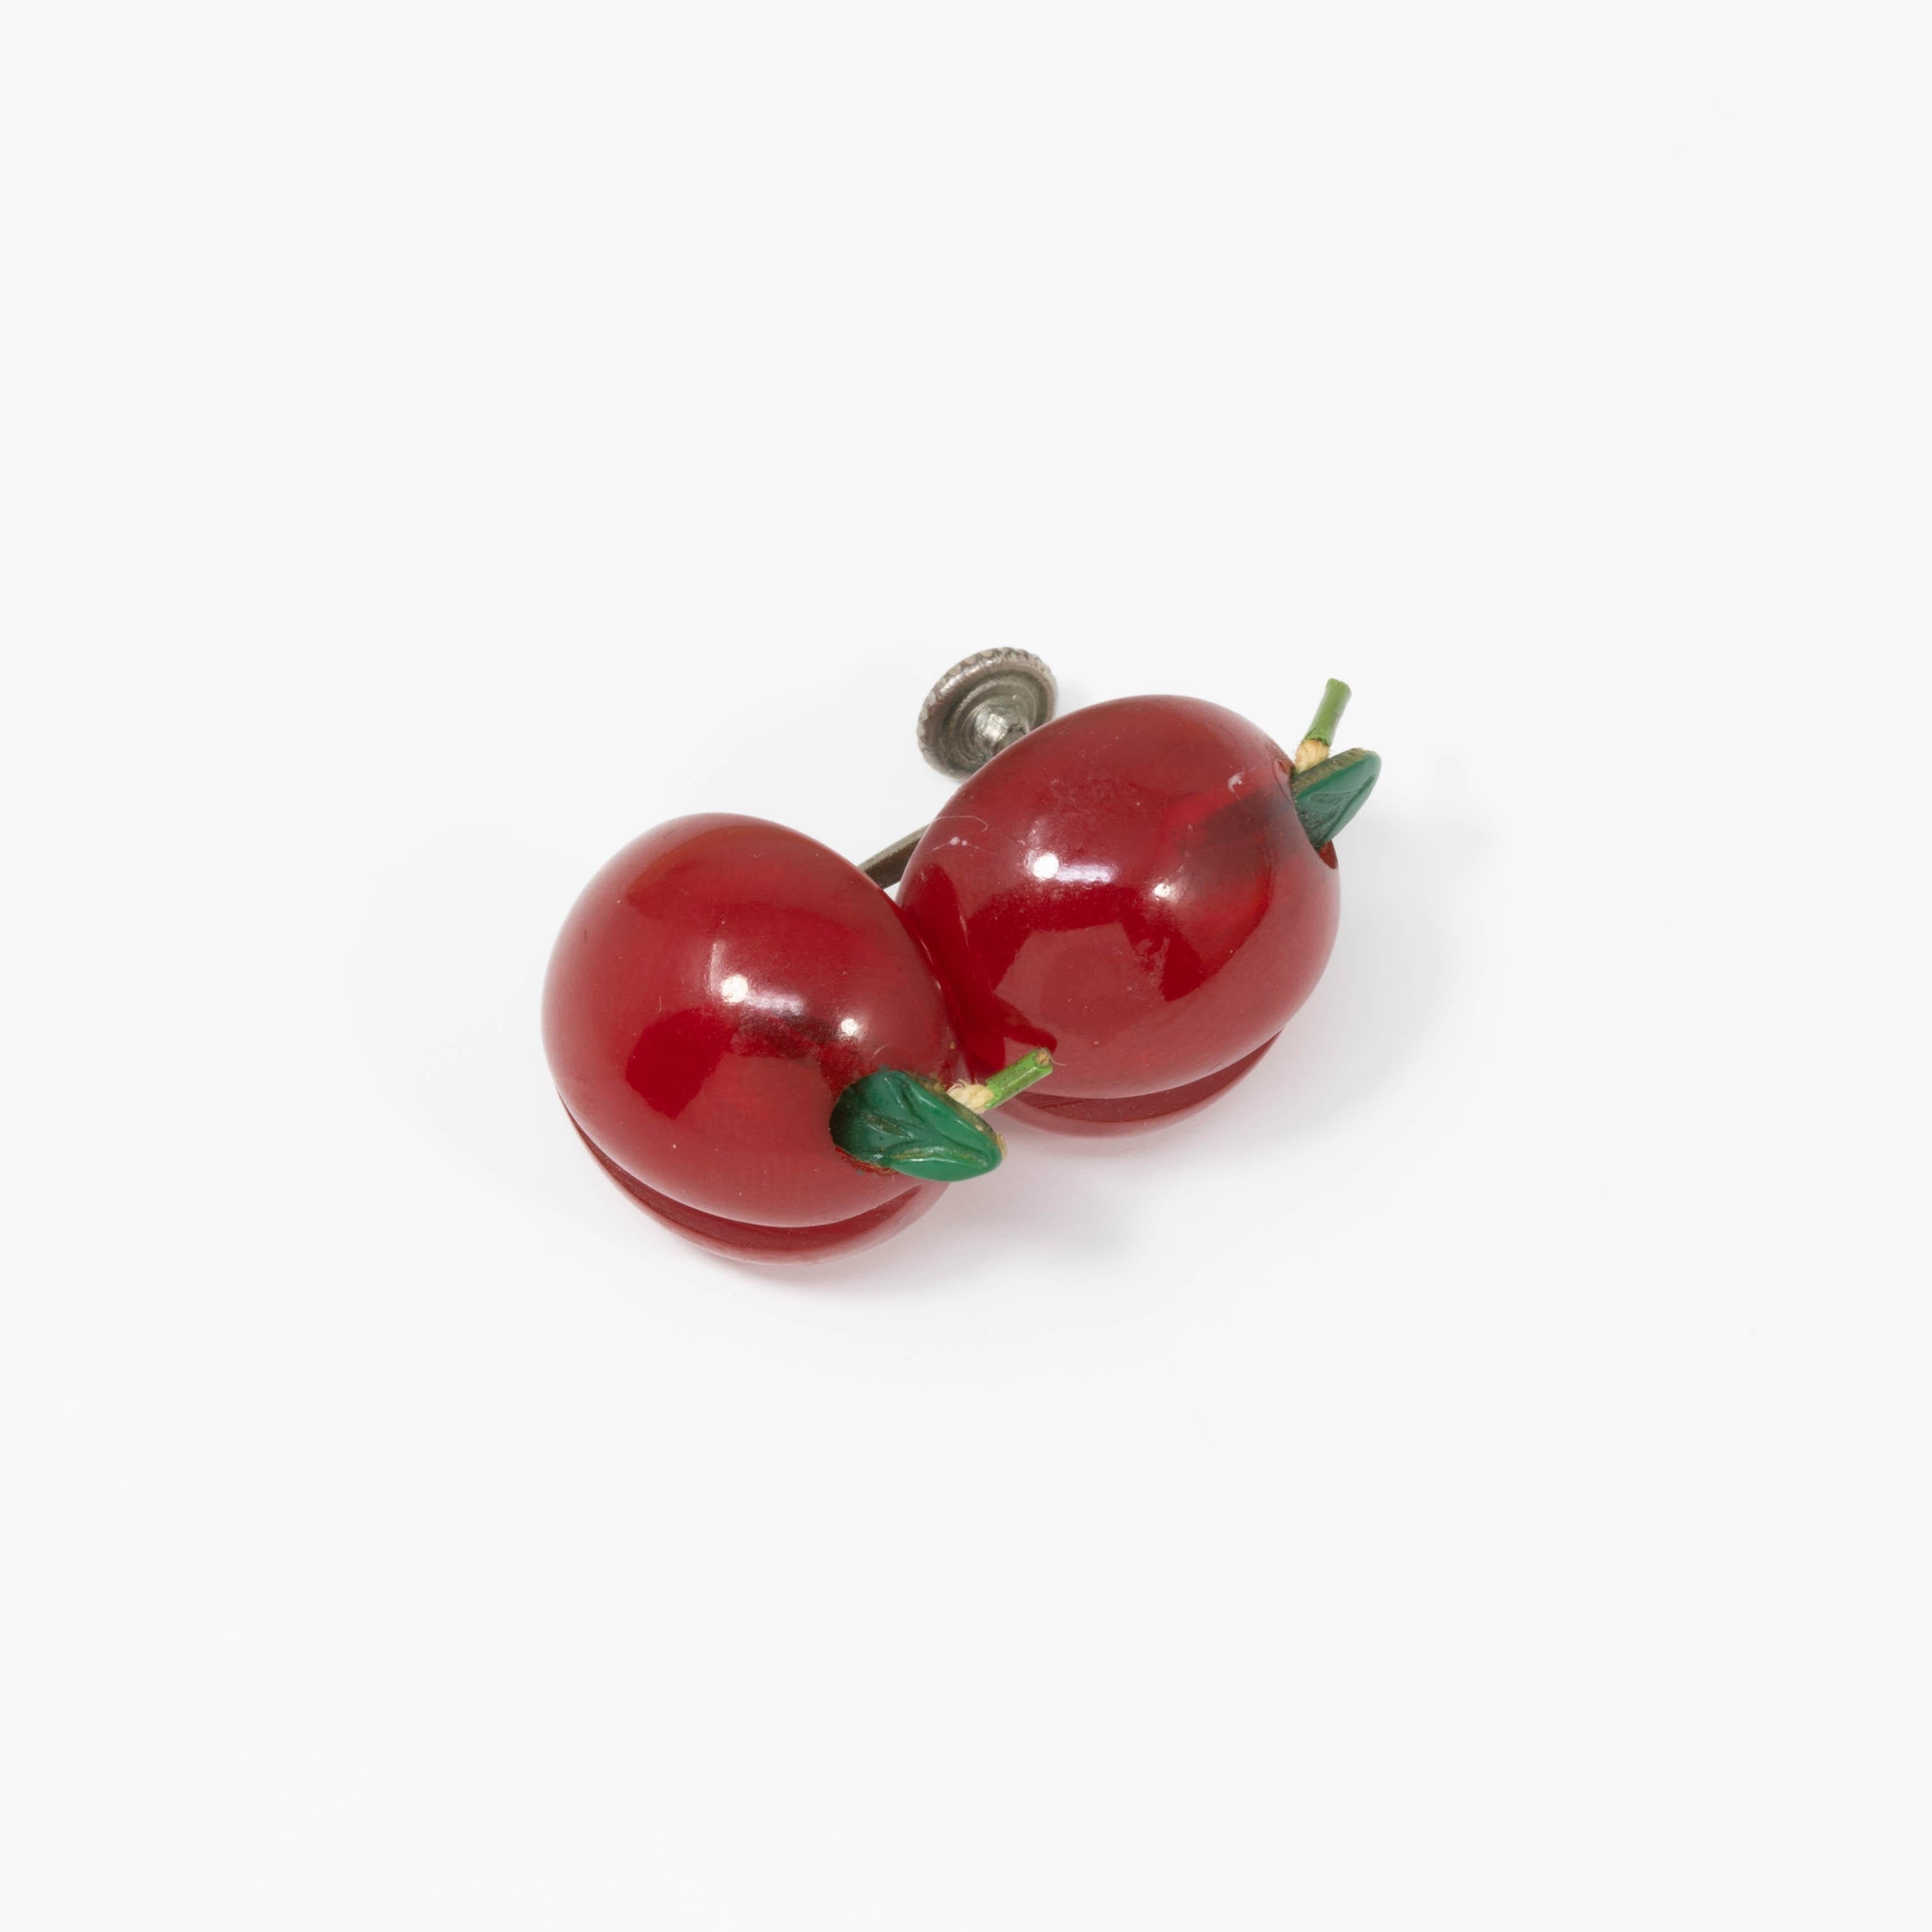 A pair of retro bakelite earrings. Each earring features candy apple red bakelite buttons accented with green leaves, set on vintage silvertone screw back findings.